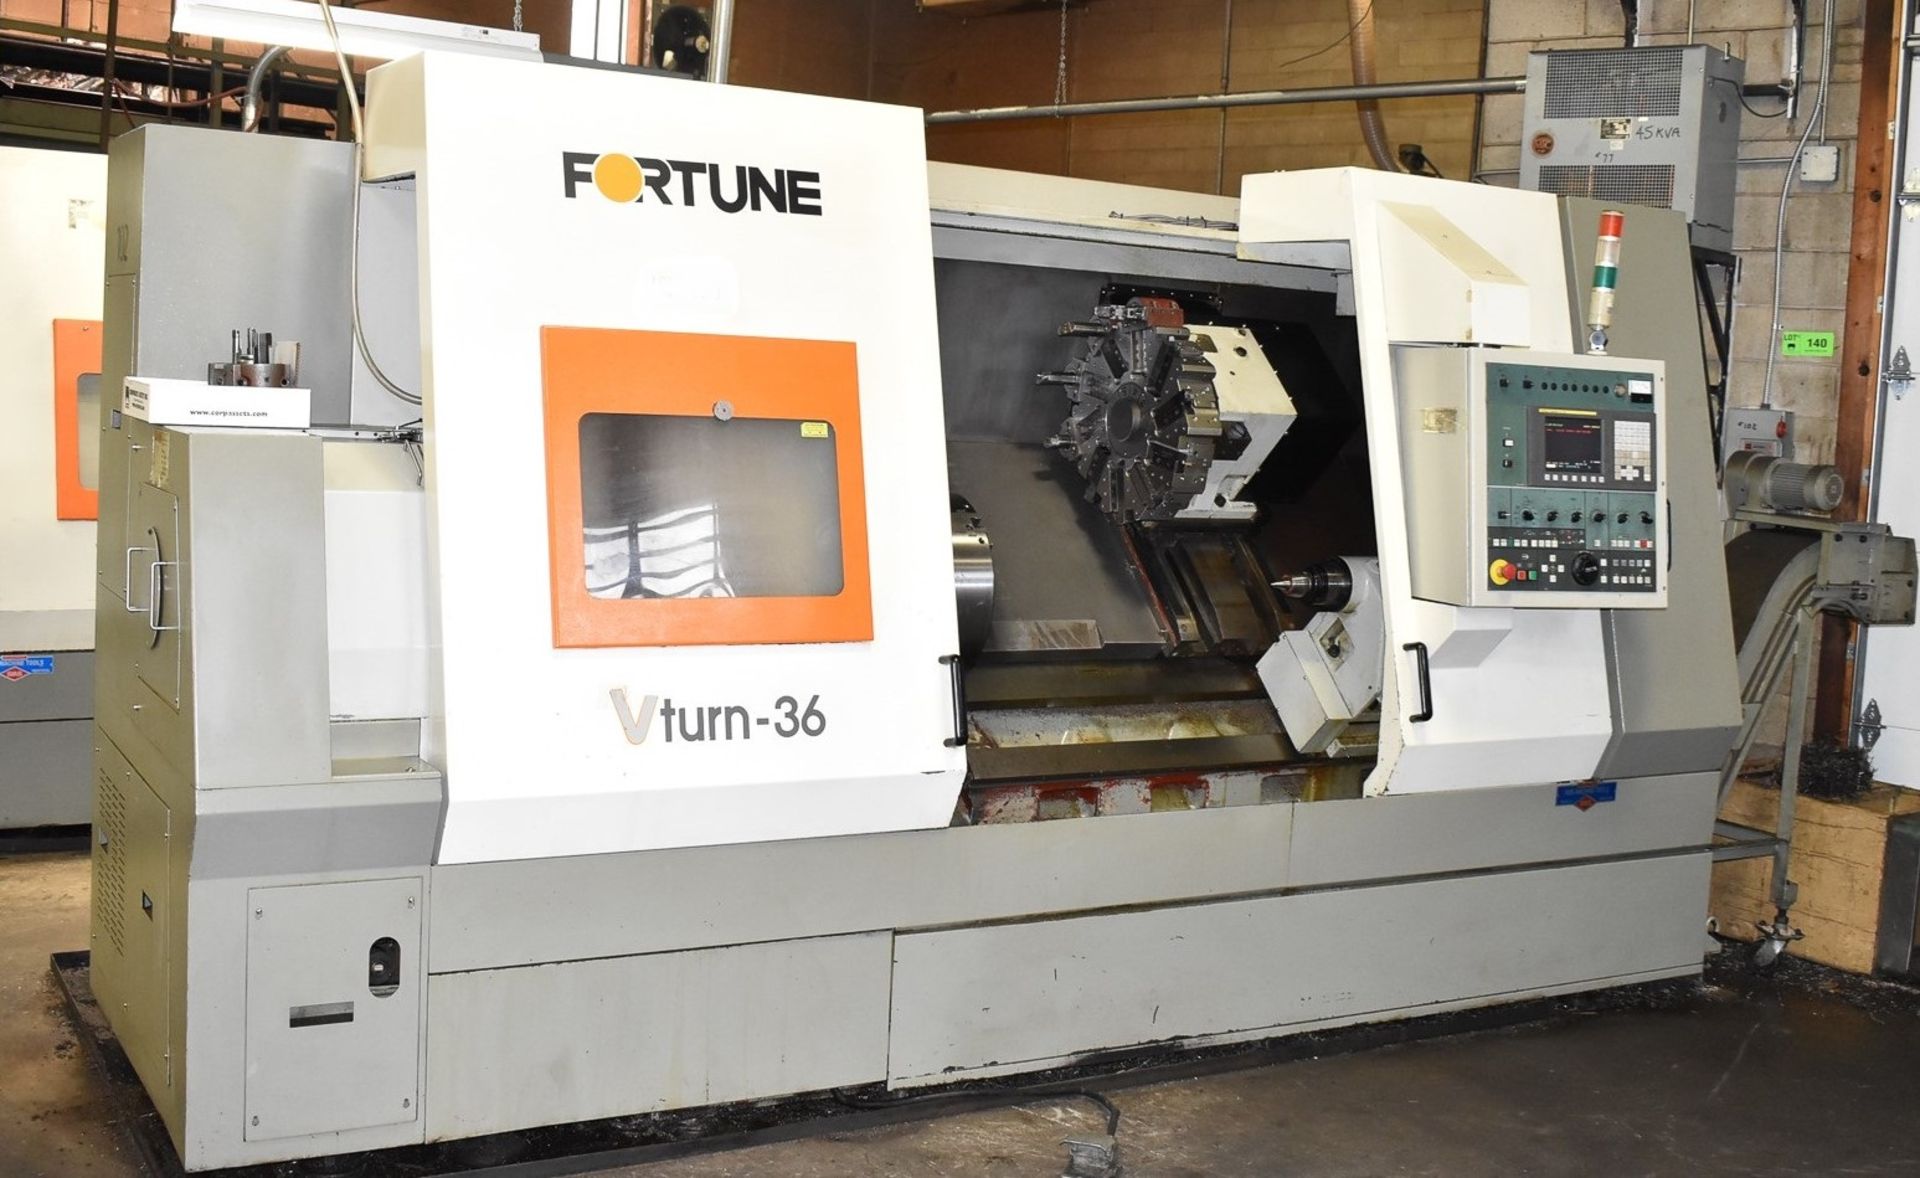 21.65"x35" Victor (Fortune) Model VTurn-36 2-Axis CNC Turning Center Lathe, S/N MD-1636, New 2007 - Image 2 of 10